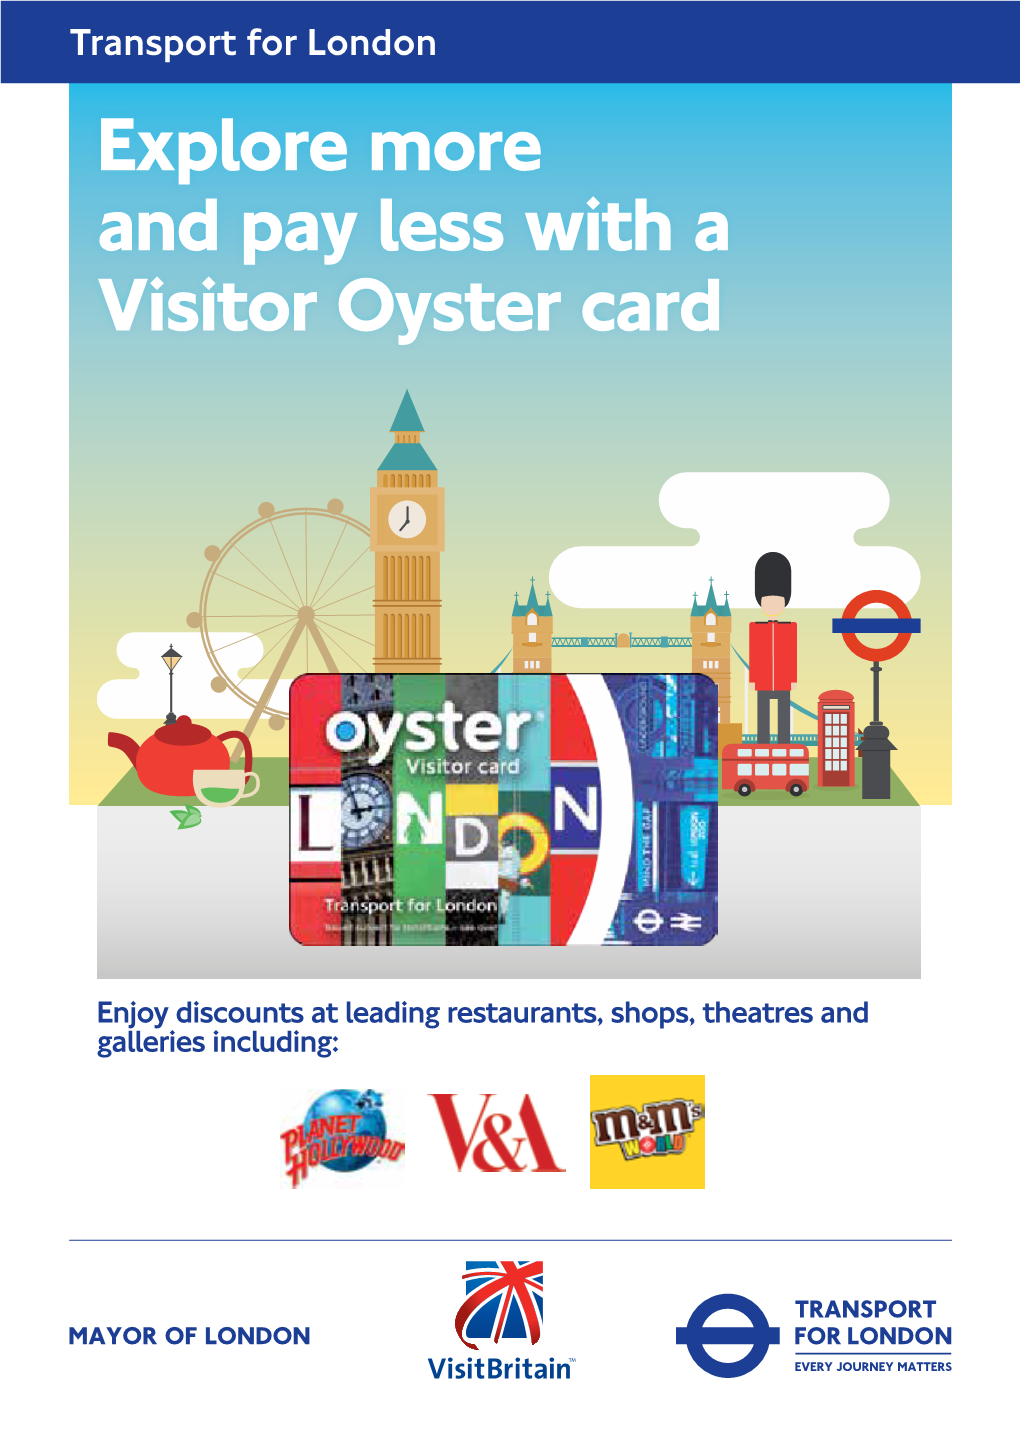 Explore More and Pay Less with a Visitor Oyster Card